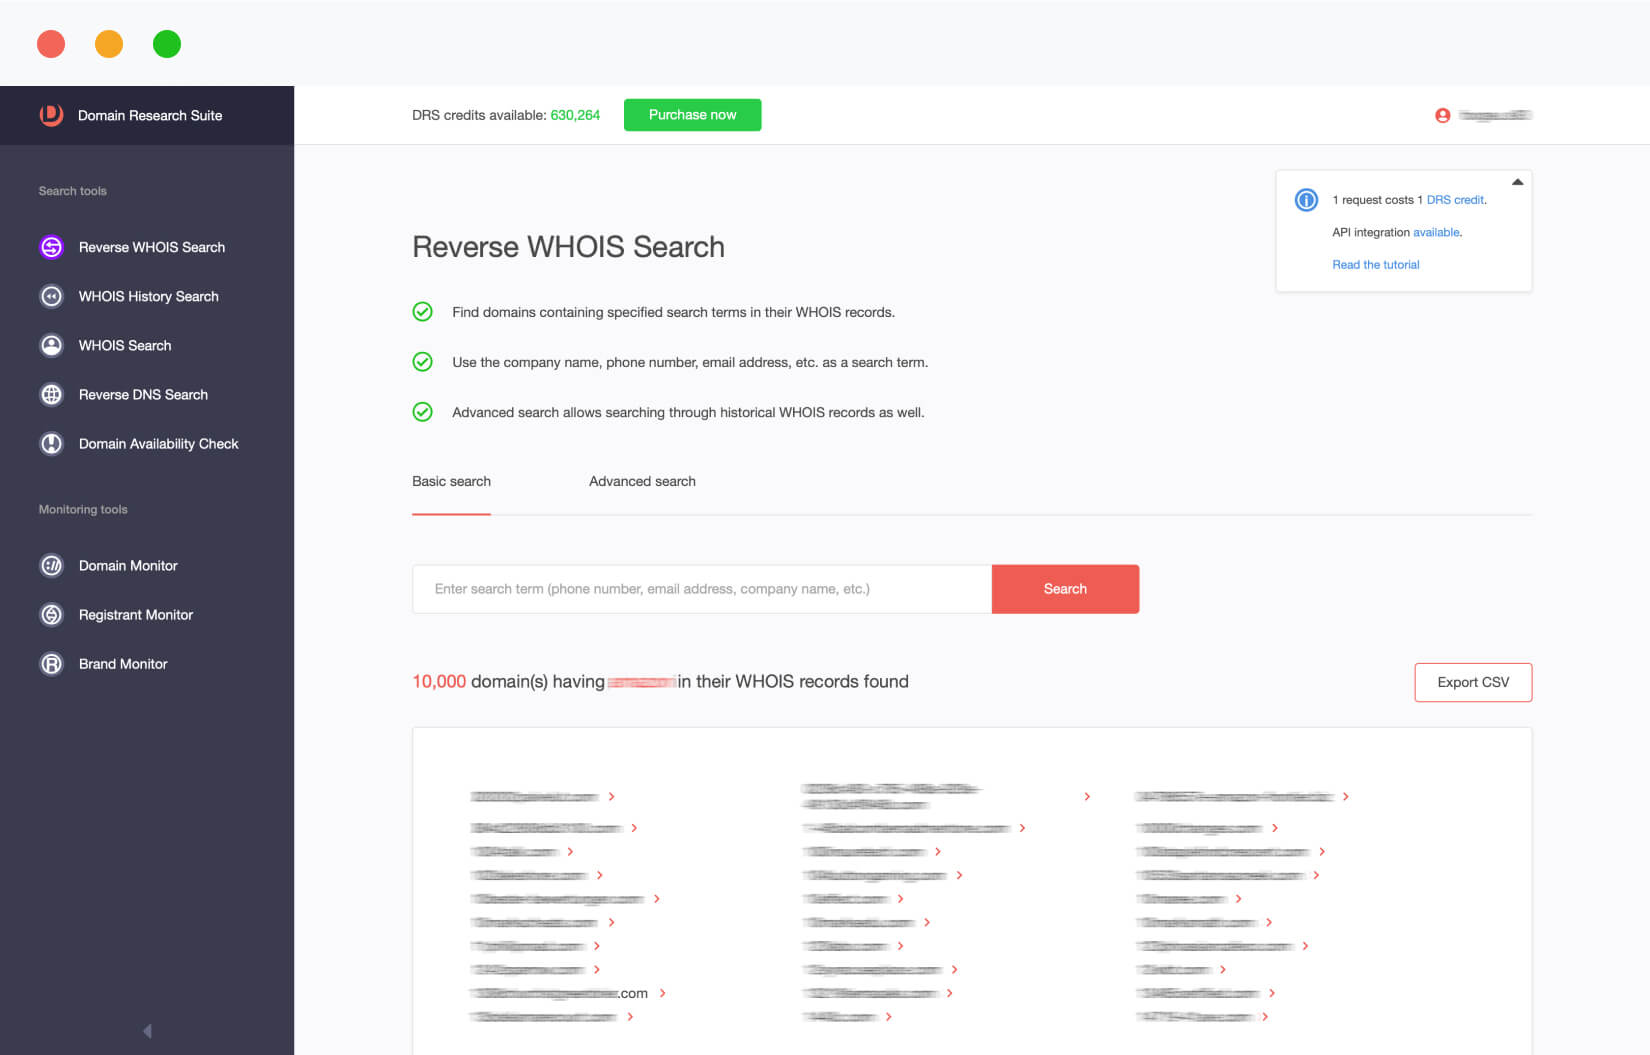 Reverse WHOIS Search